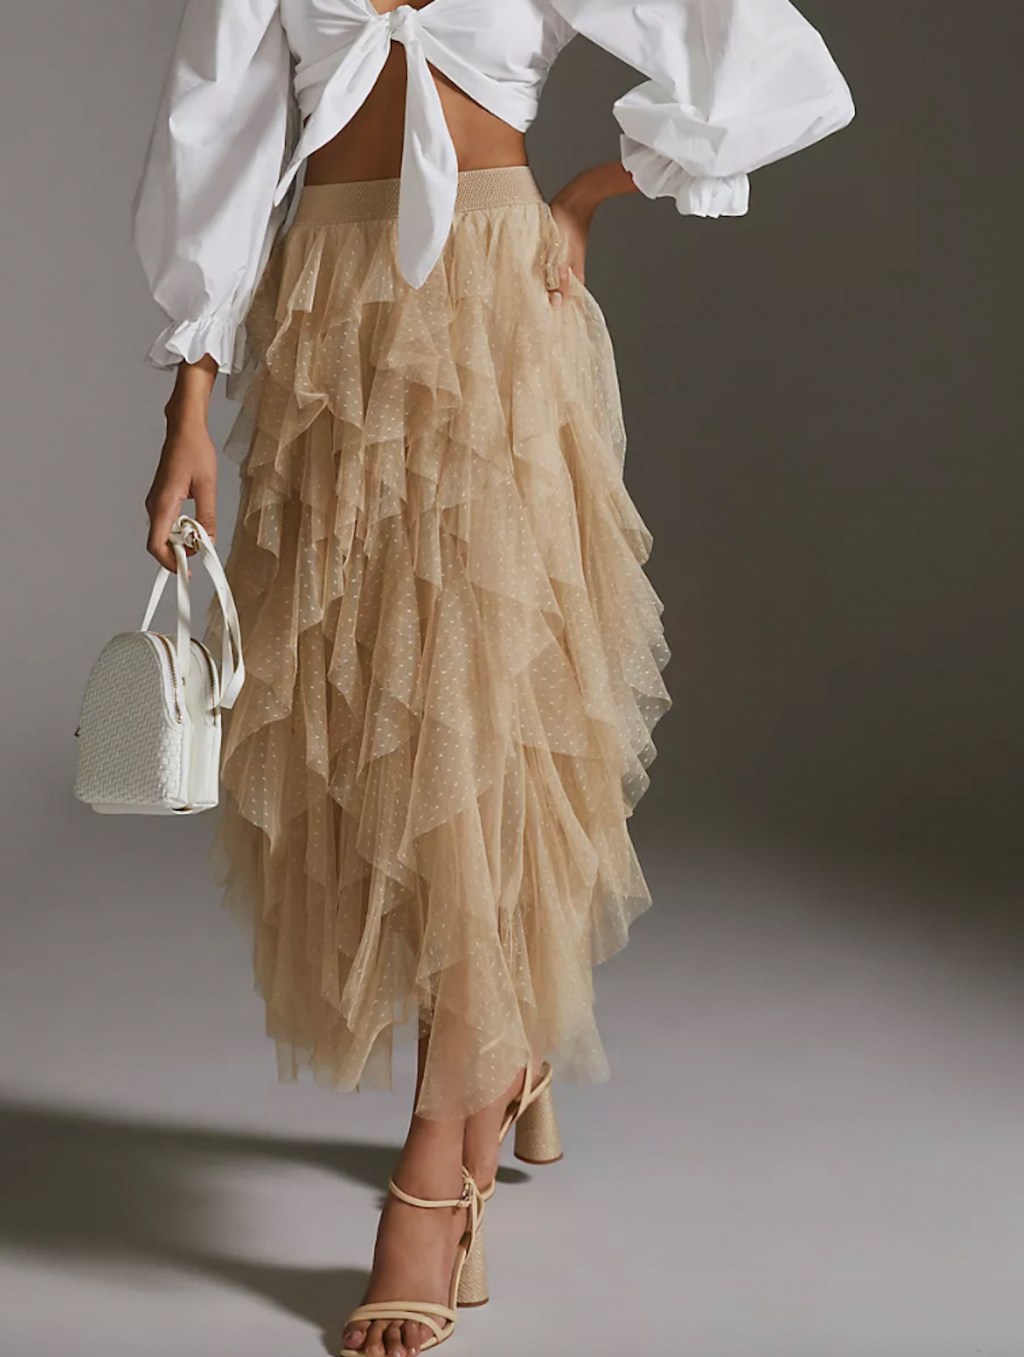 women wearing beige tulle skirt with white top and purse